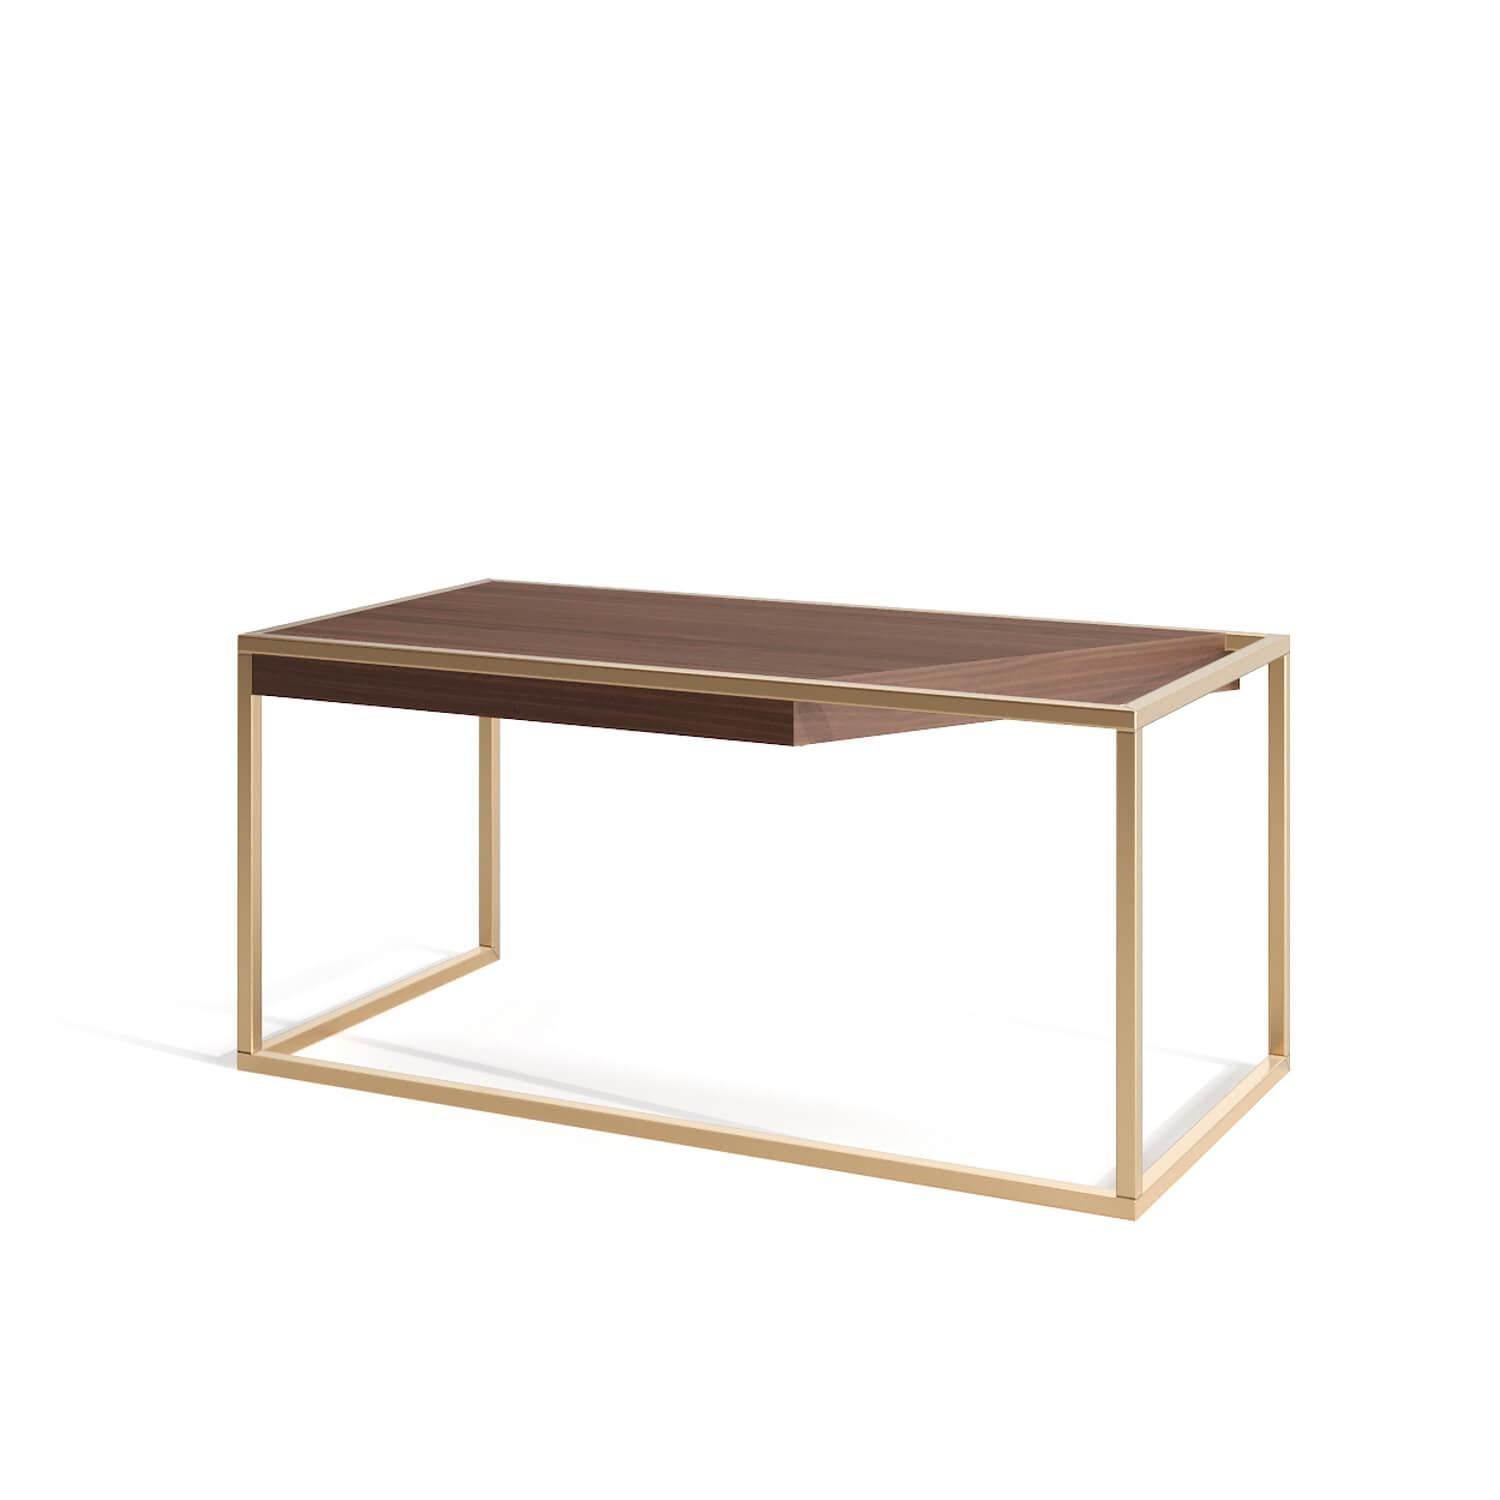 Portuguese Modern Minimalist Home Office Writing Desk in Walnut Wood and Brushed Brass For Sale